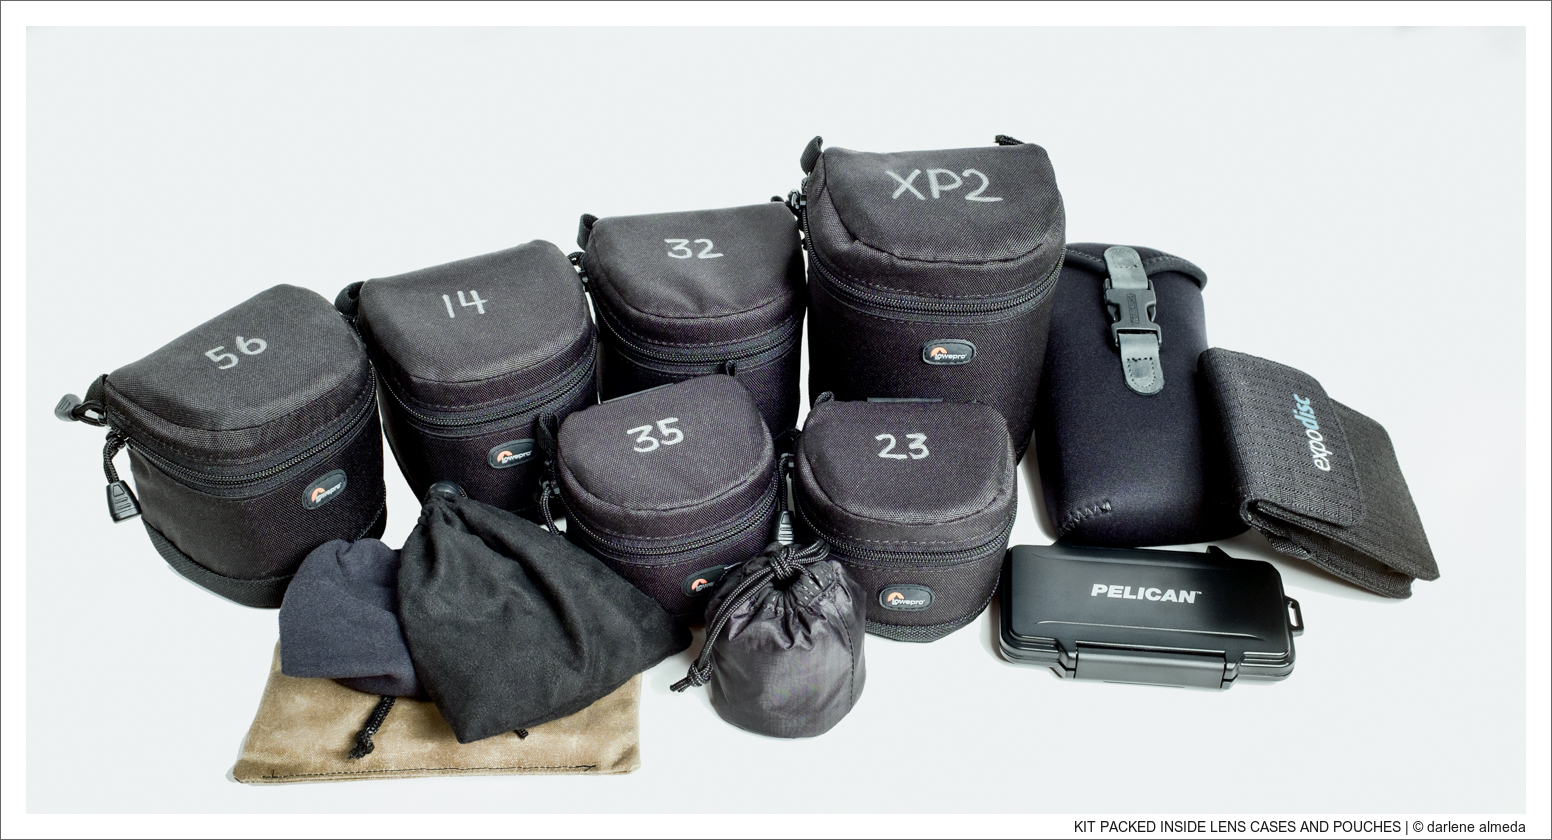 KIT PACKED INSIDE LENS CASES AND POUCHES